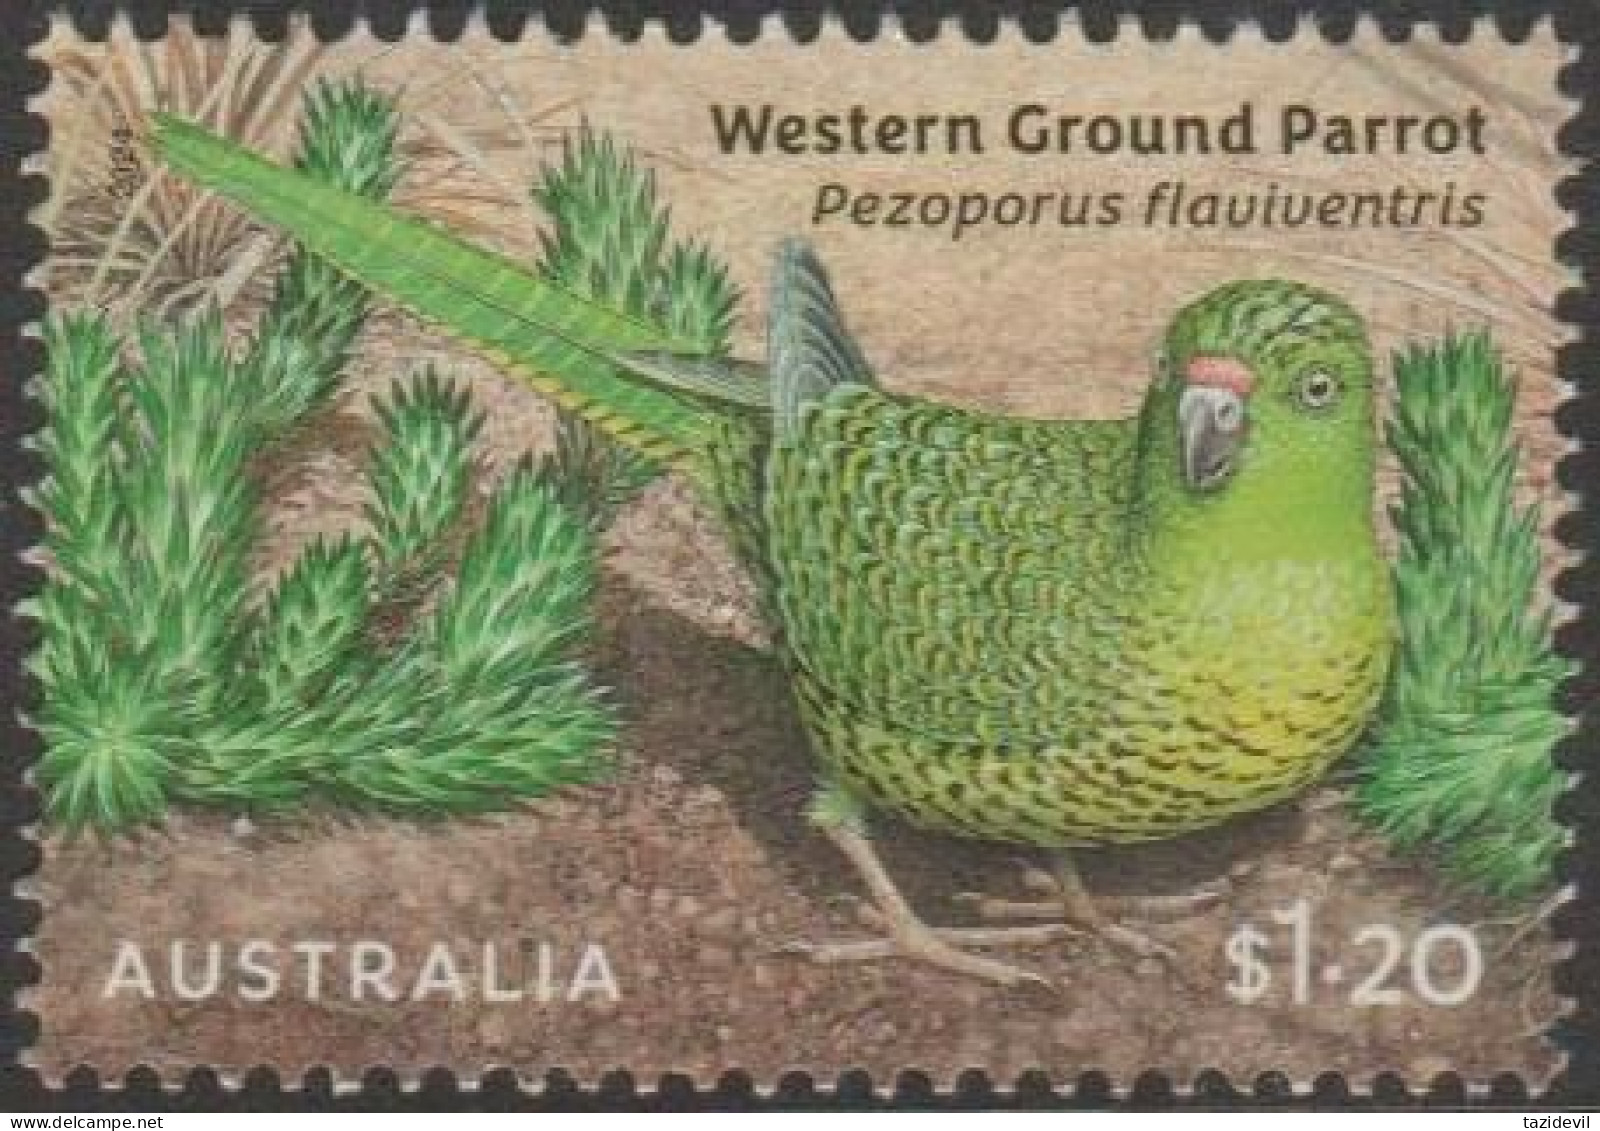 AUSTRALIA - USED 2024 $1.20 Australian Ground Parrots - Western Ground Parrot - Used Stamps